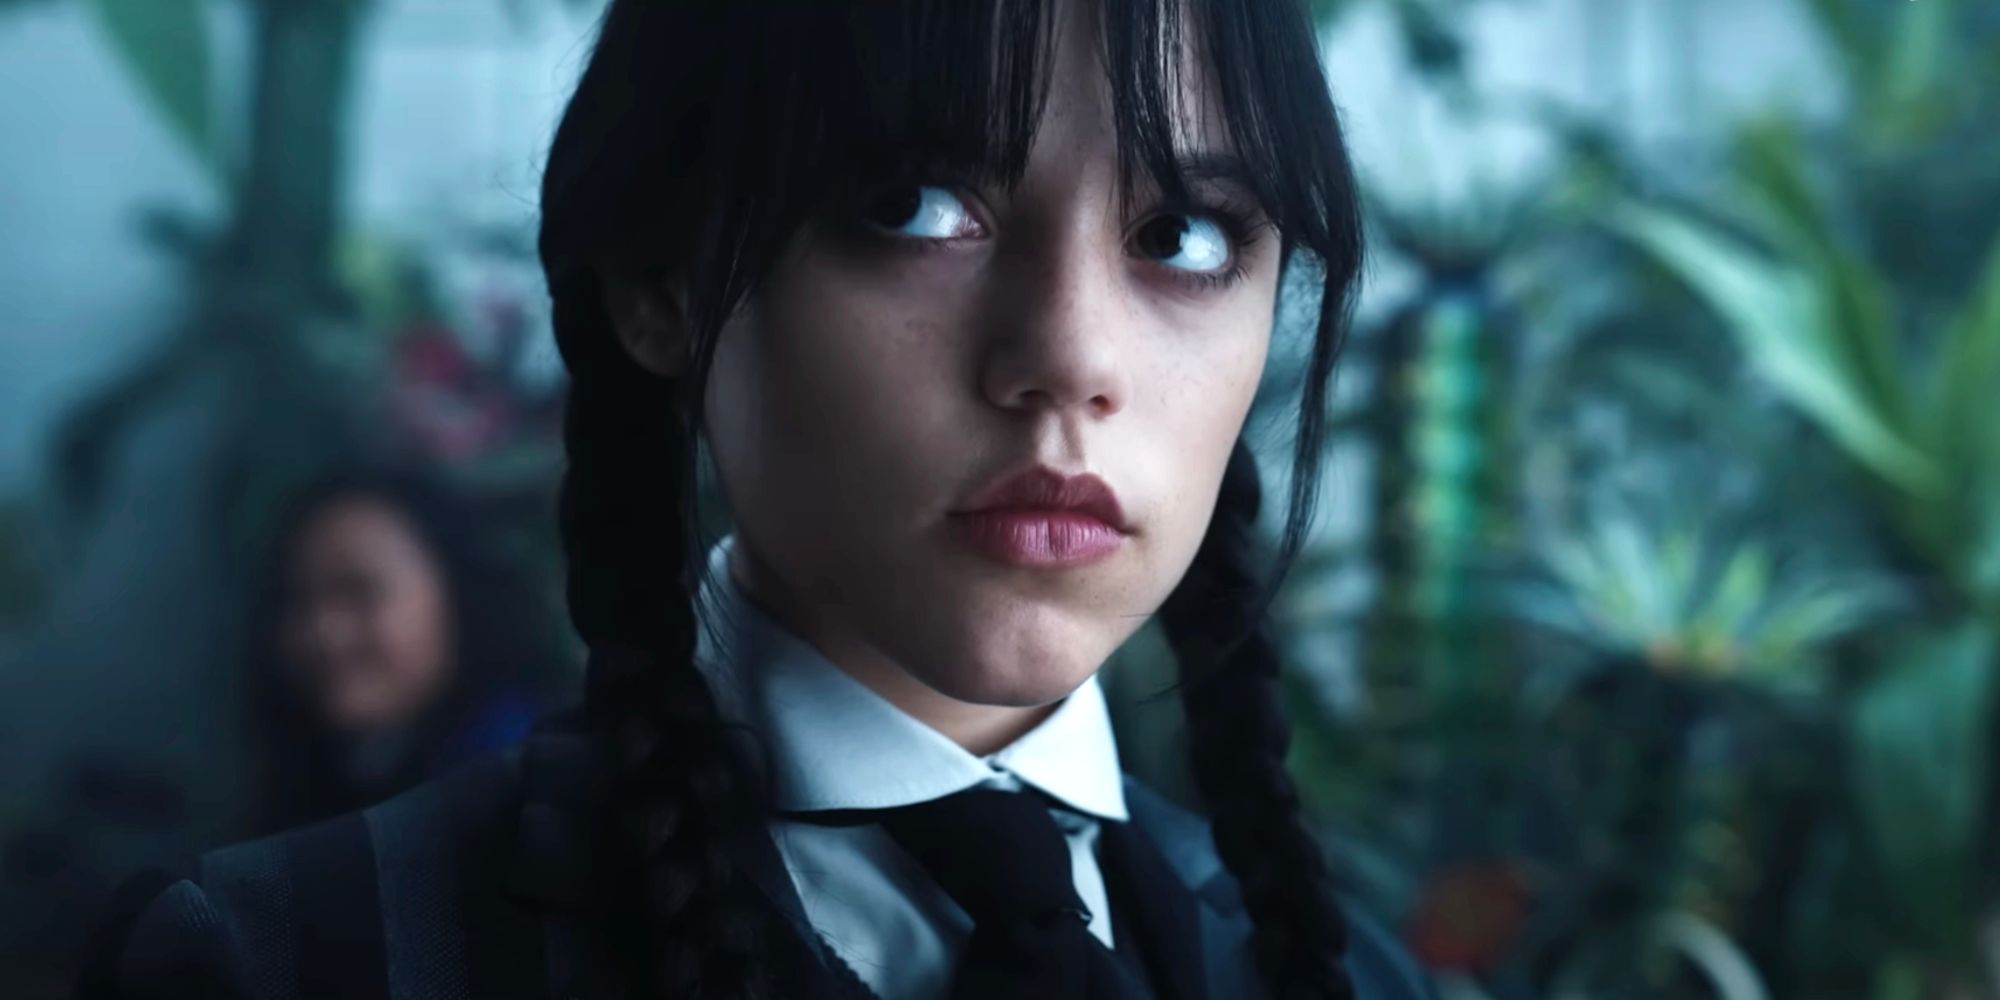 Jenna Ortega looking serious in Wednesday